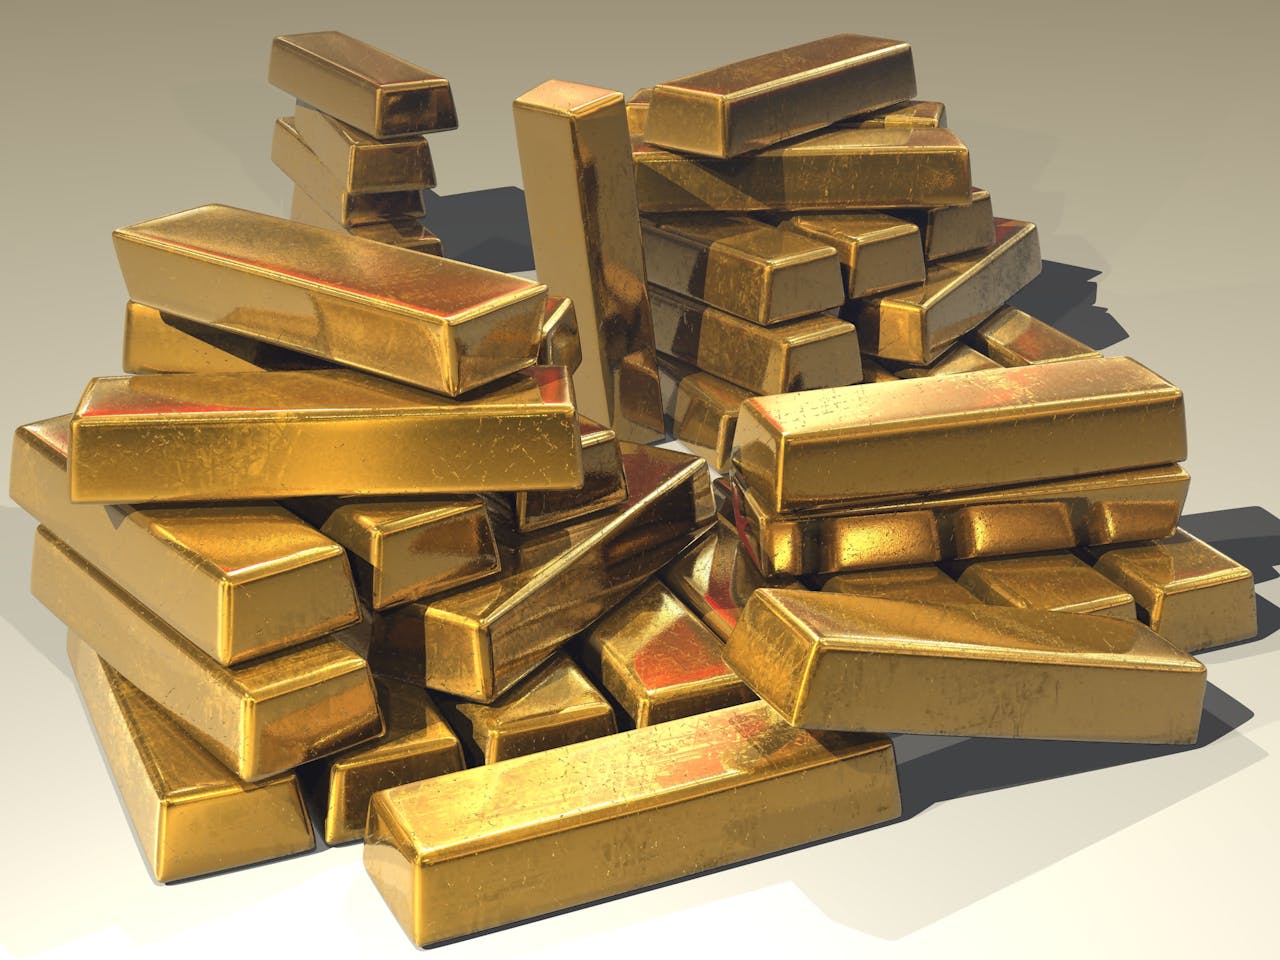 The Hidden Cost of Inflation: Why Gold Outshines Bonds in an Era of Currency Destruction